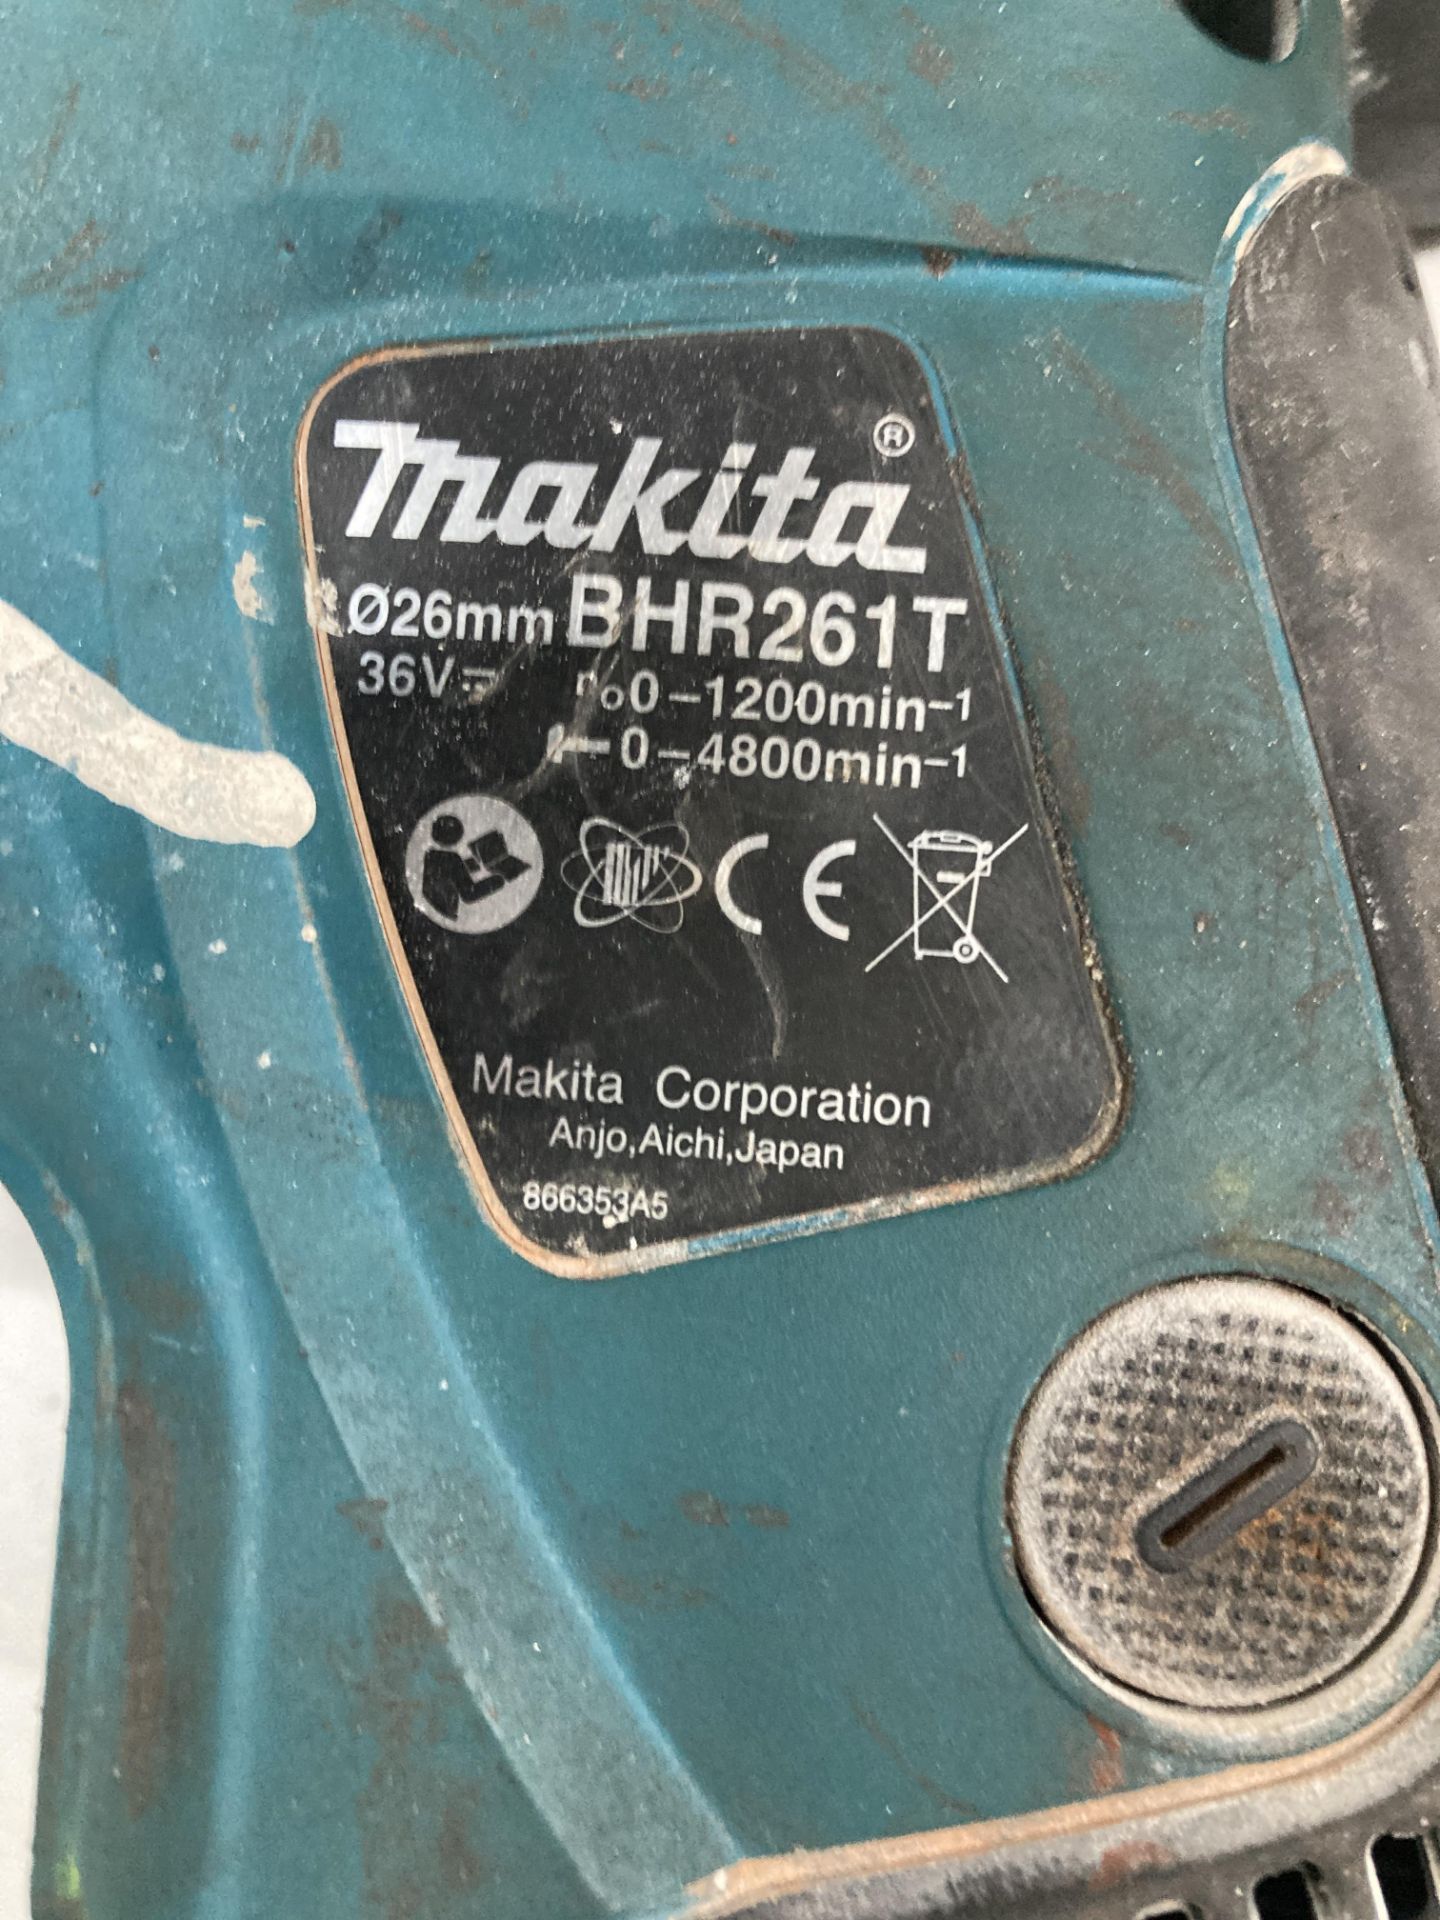 Makita BHR261T Hammer Drill w/ Charger & Battery - Image 3 of 4